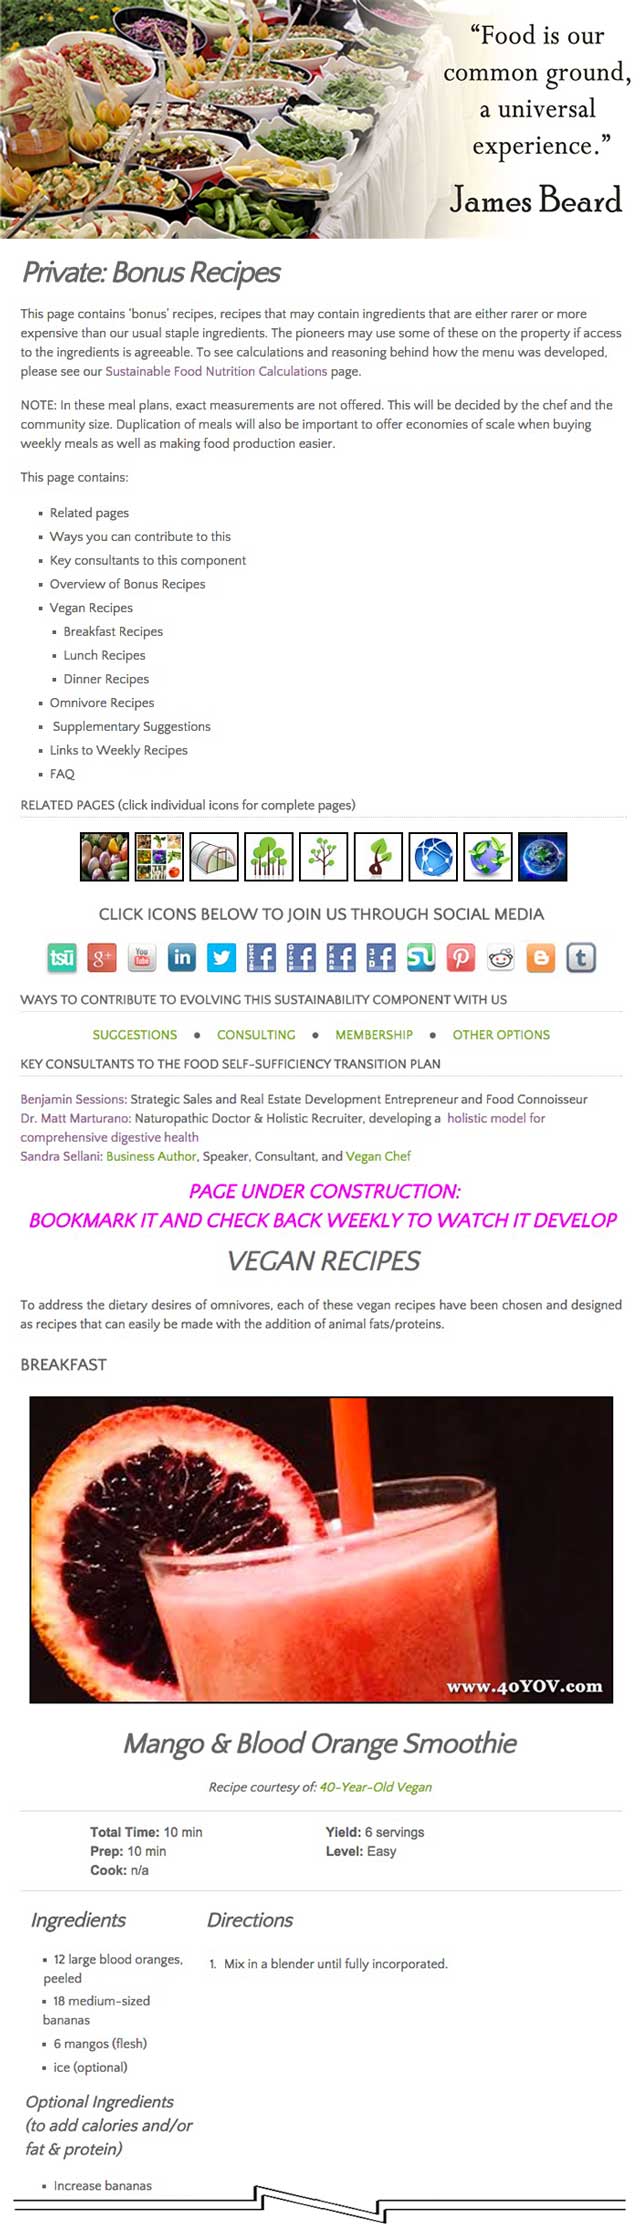 This last week the core team completed another round organizing the streamlined version of our Food Self-sufficiency Transition Plan page, which includes contributions provided by Naturopathic Doctor Matt Marturano (creator of the COHERENT model for comprehensive digestive health). This week we further organized the recipes, creating a page for bonus recipes.